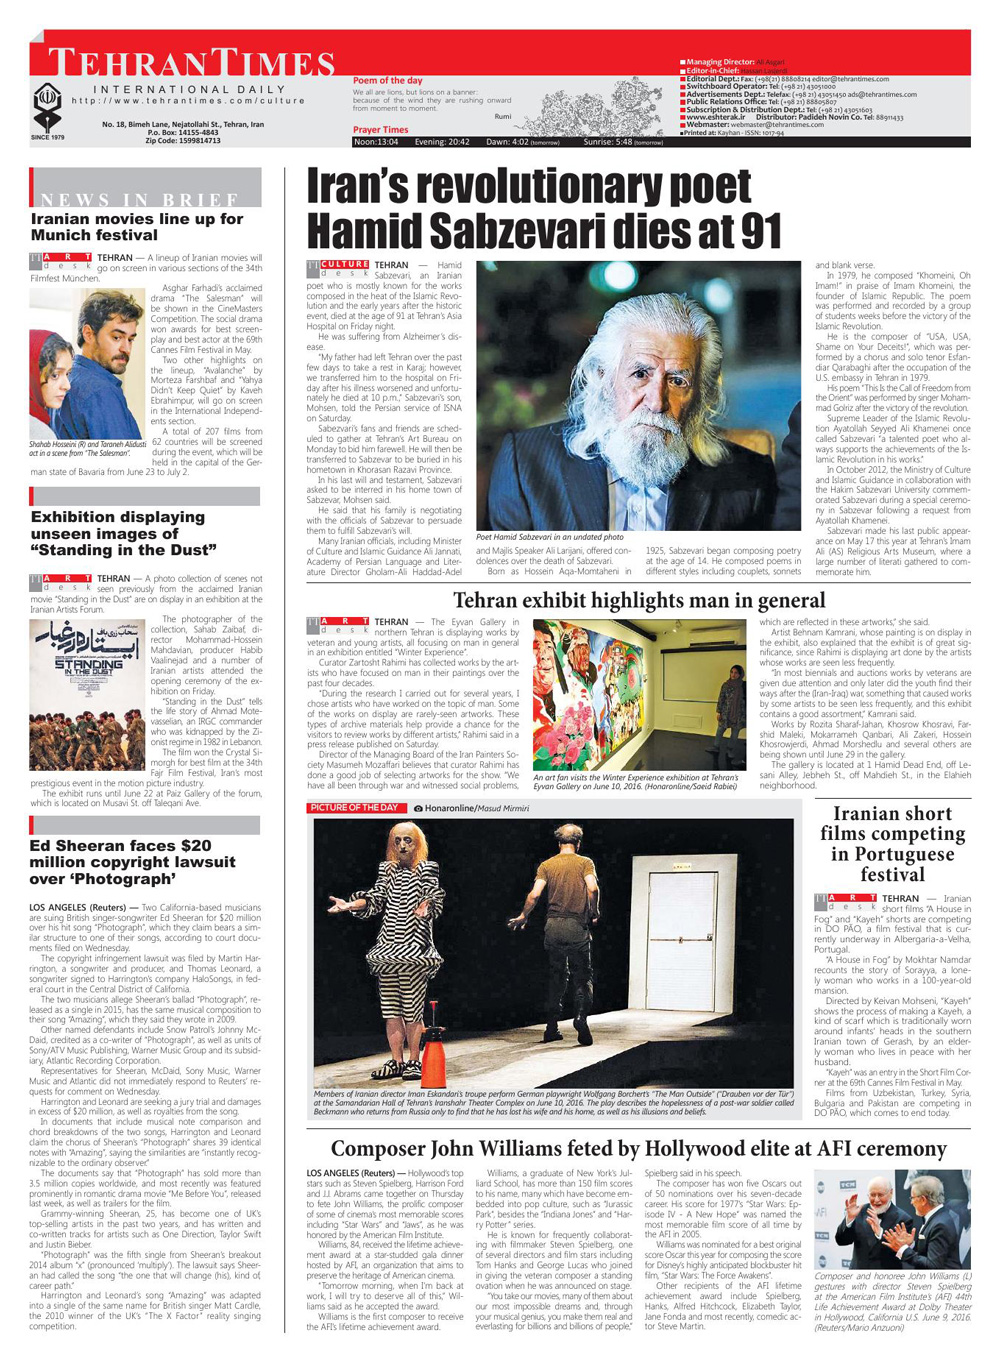 The Winter Experience / Tehran Times Daily